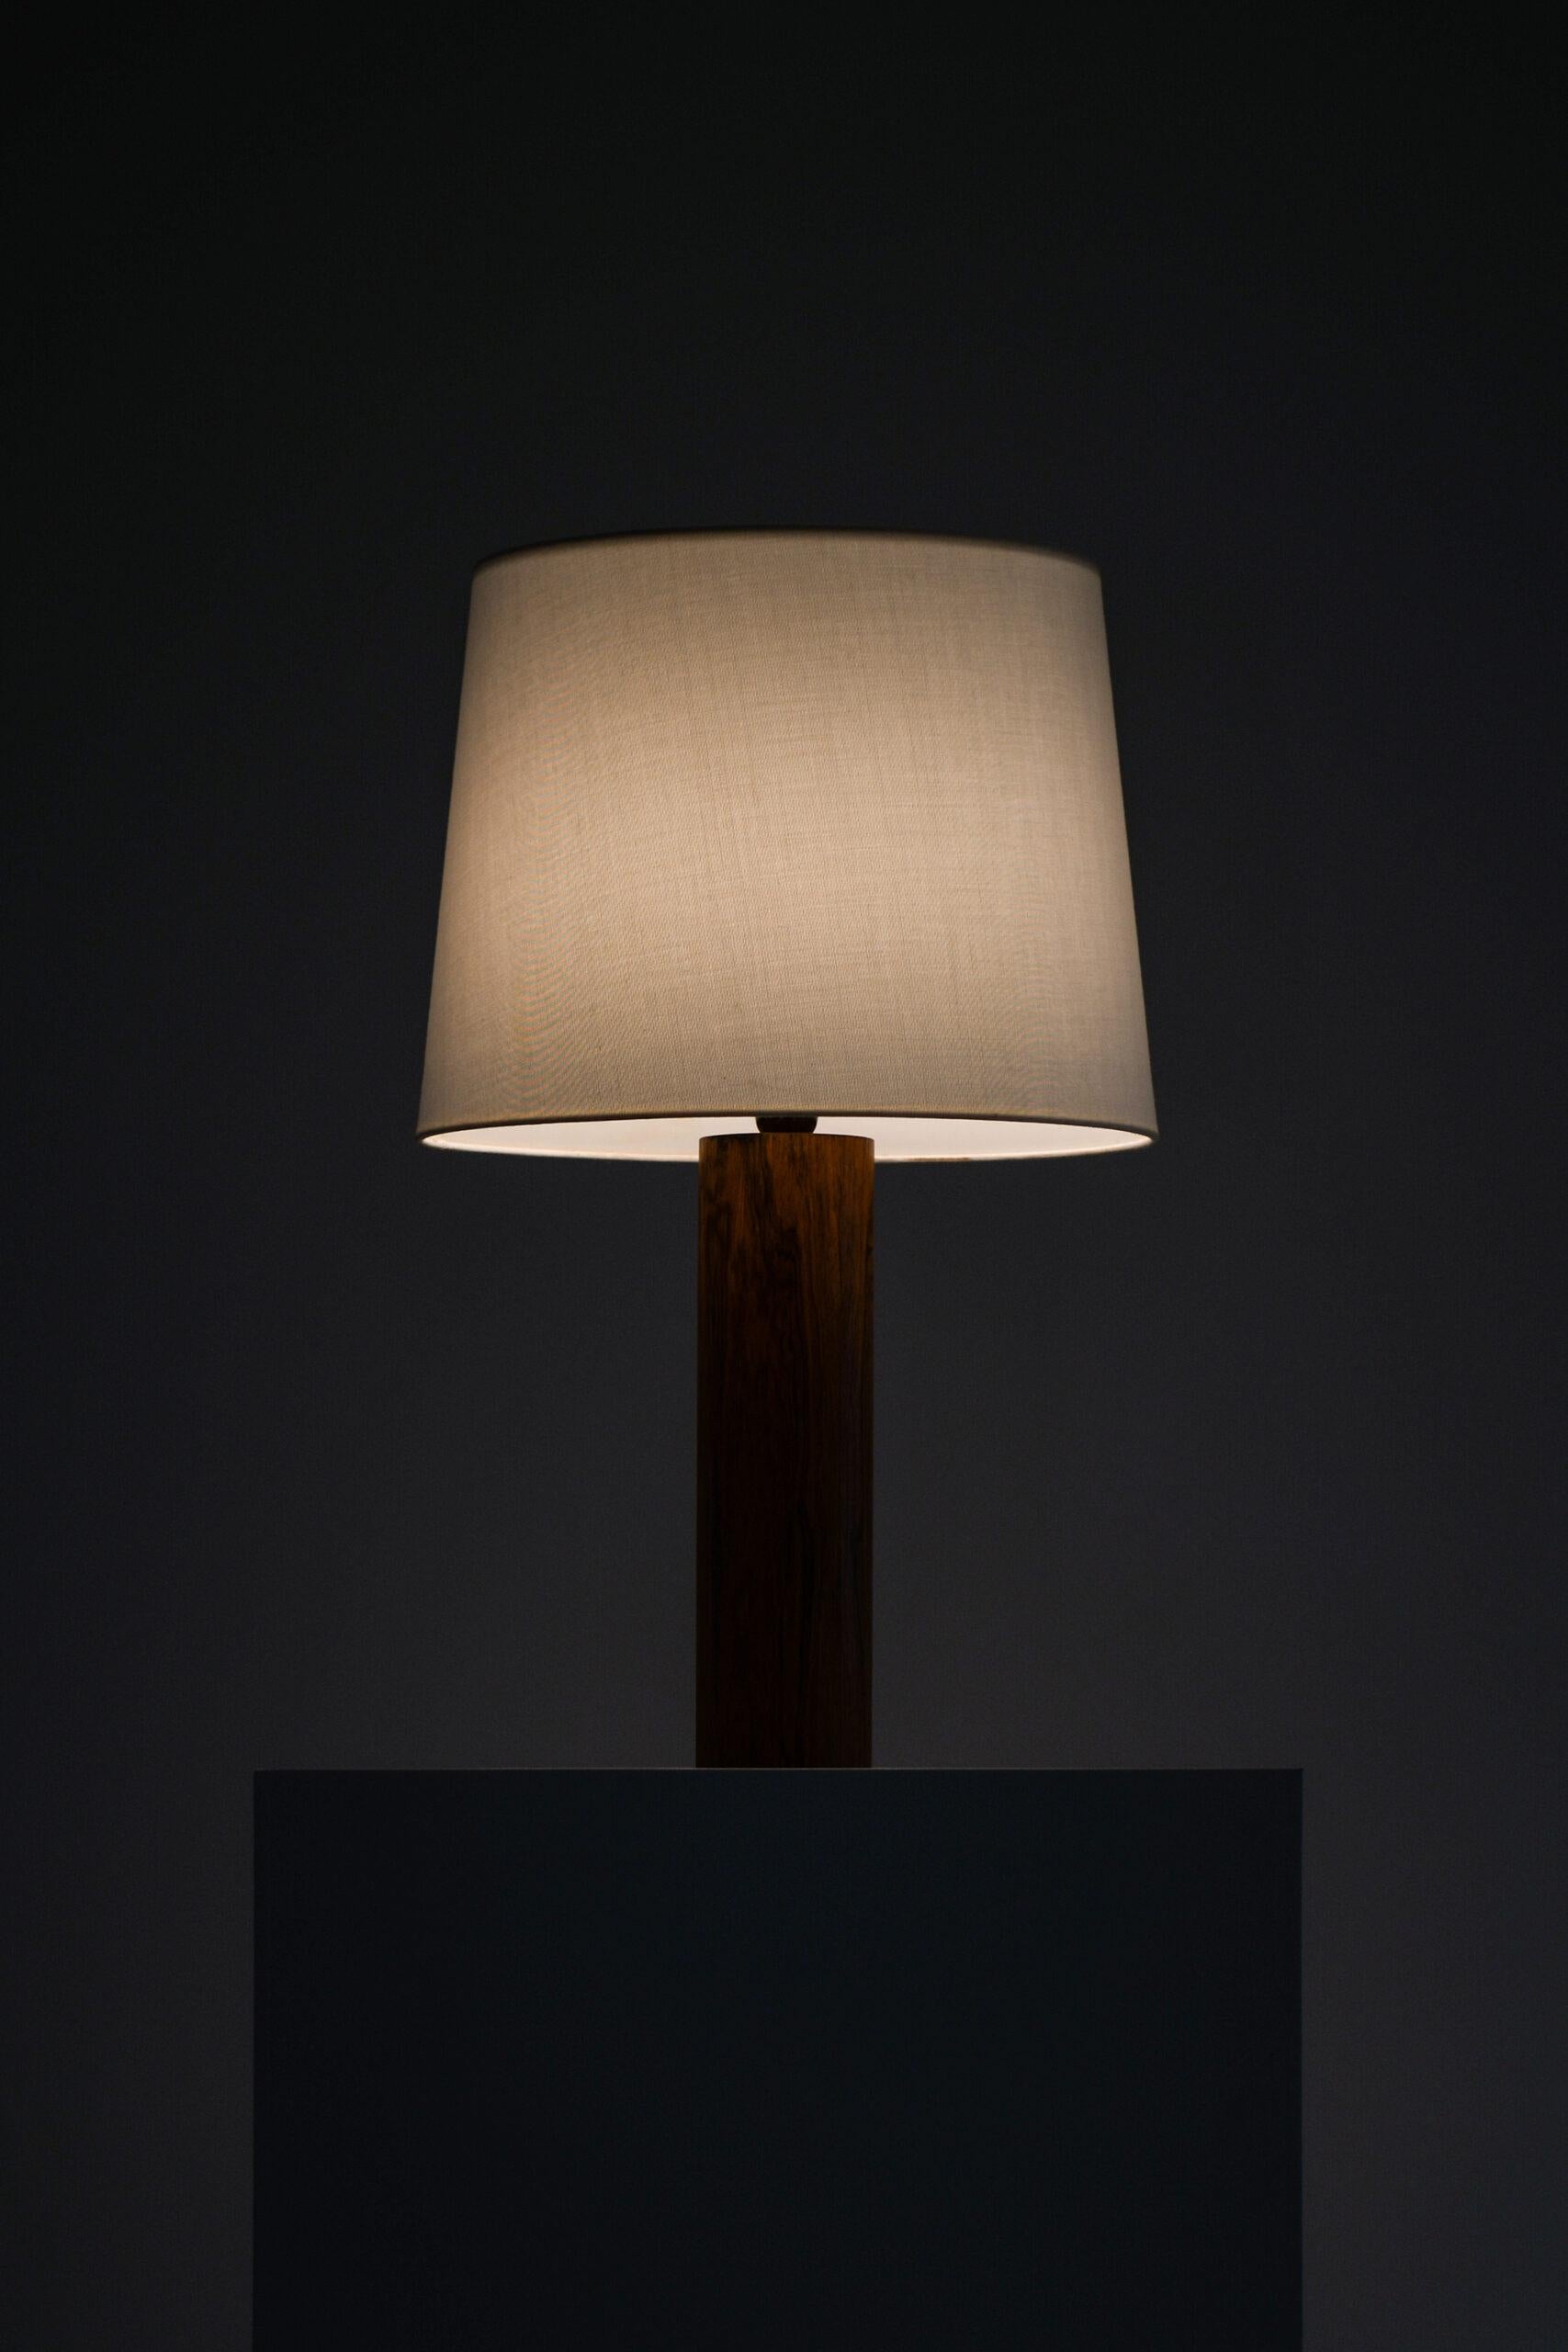 Rosewood Table Lamps Attributed to Uno & Östen Kristiansson Probably Produced by Luxus For Sale